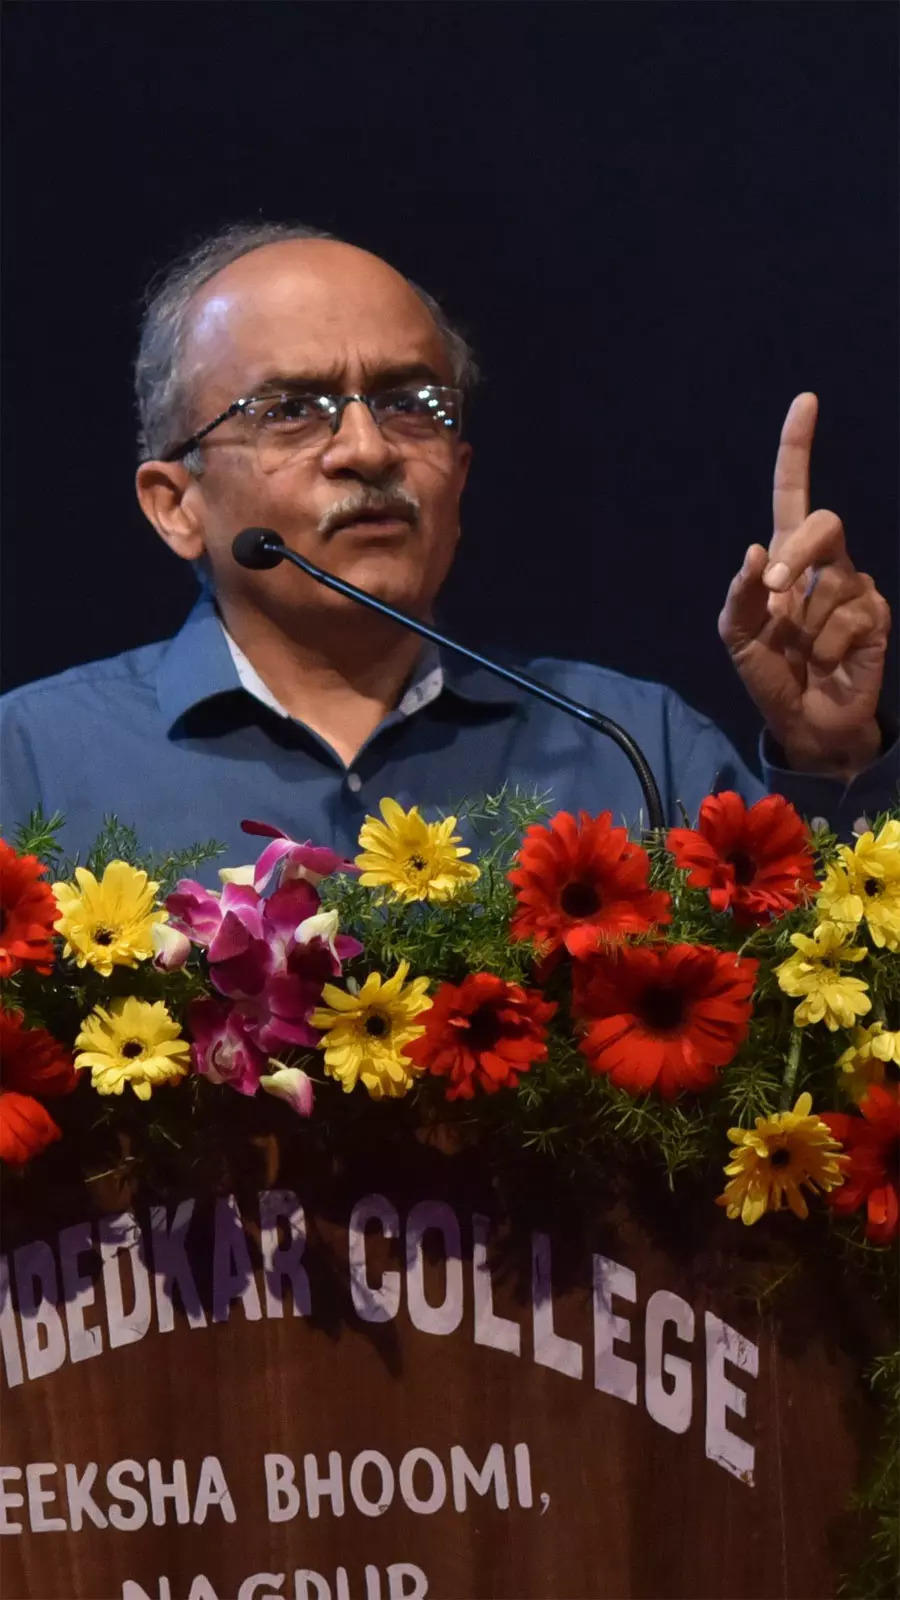 <p>Today, Prashant Bhushan continues to be a prominent figure in India's legal landscape, advocating for justice, accountability, and the protection of democratic principles through his legal practice and activism.</p>